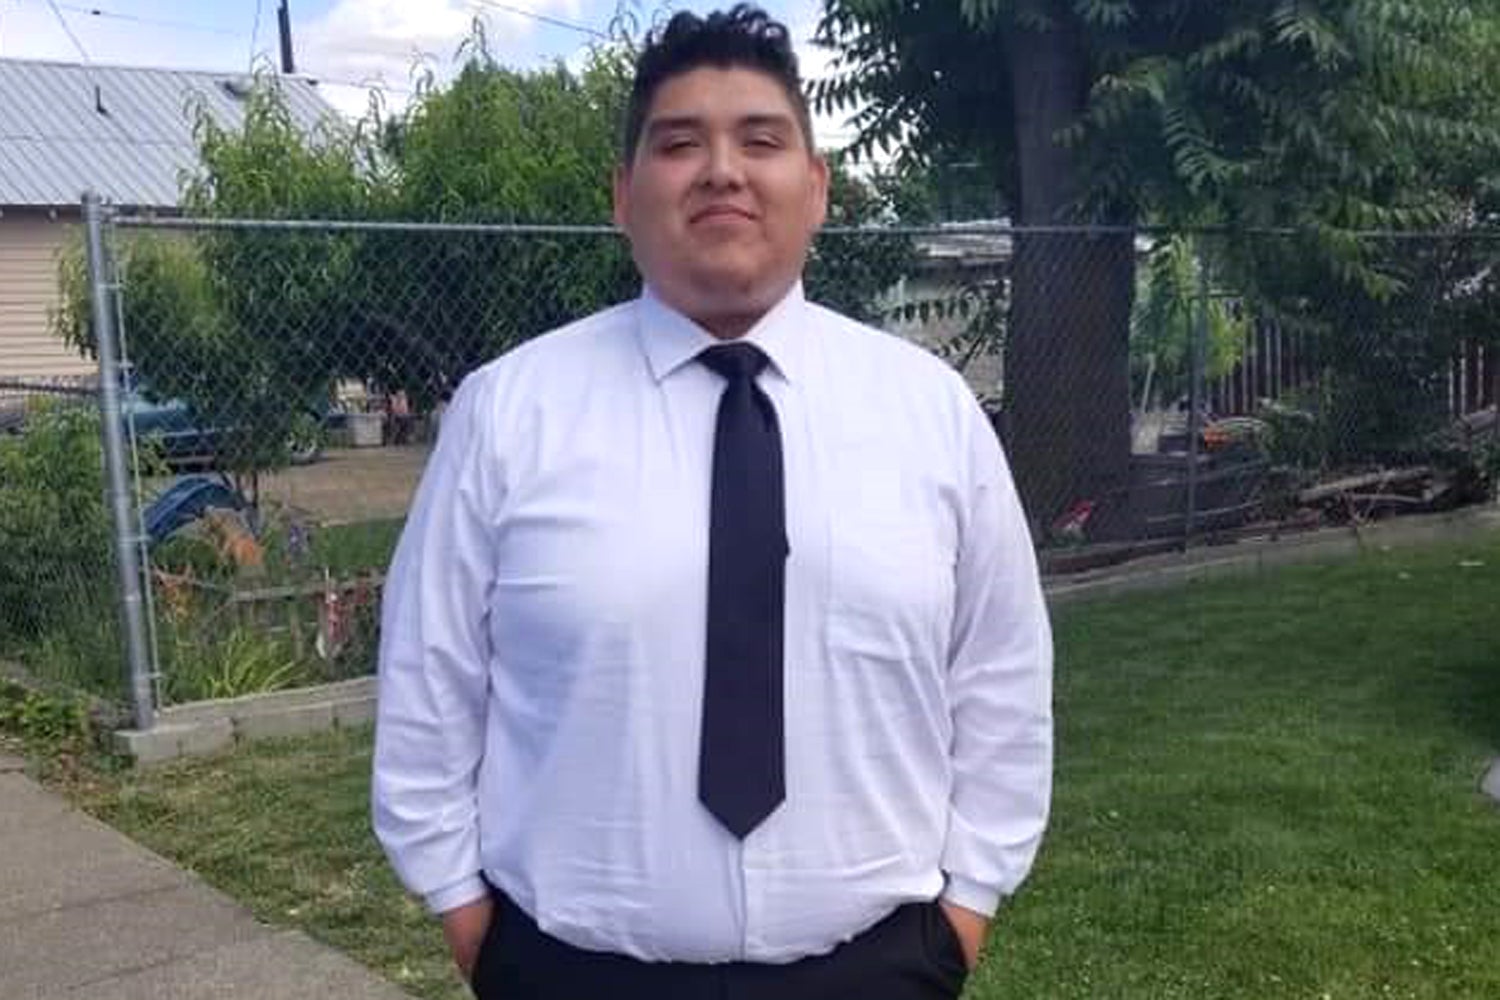 Axel Acosta, 21, was killed in the Astroworld tragedy